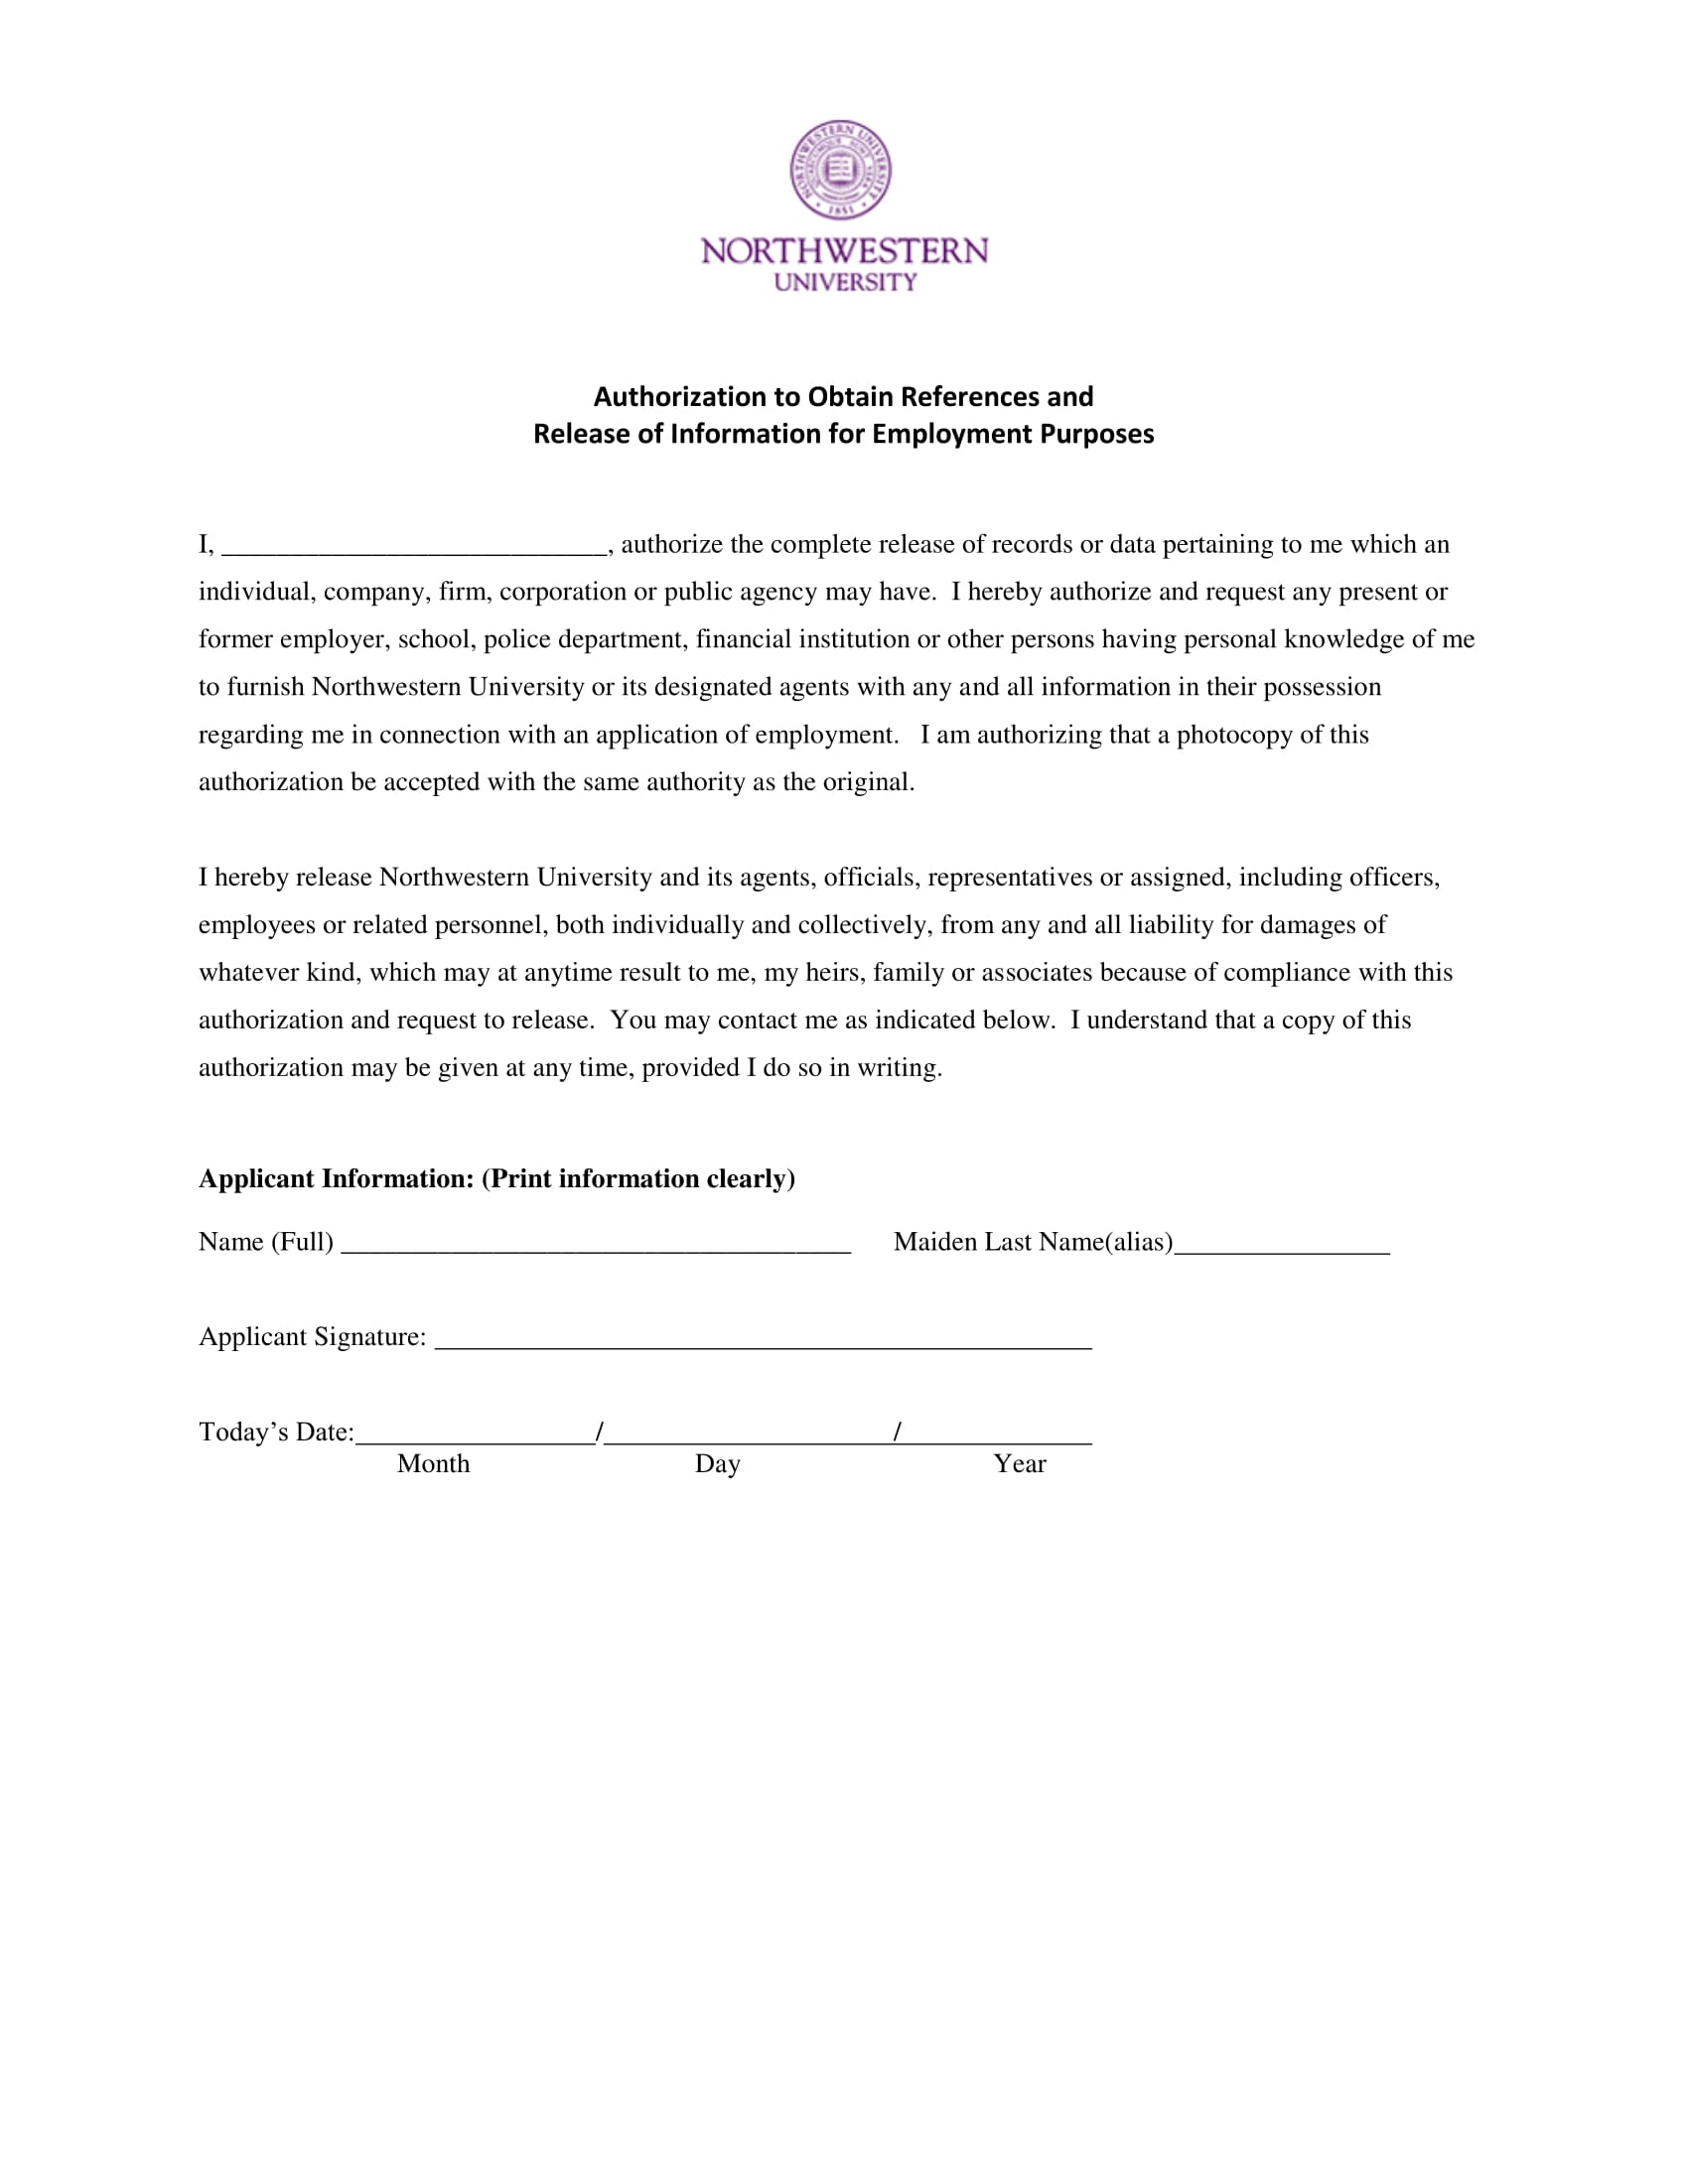 faculty reference authorization information release form 1